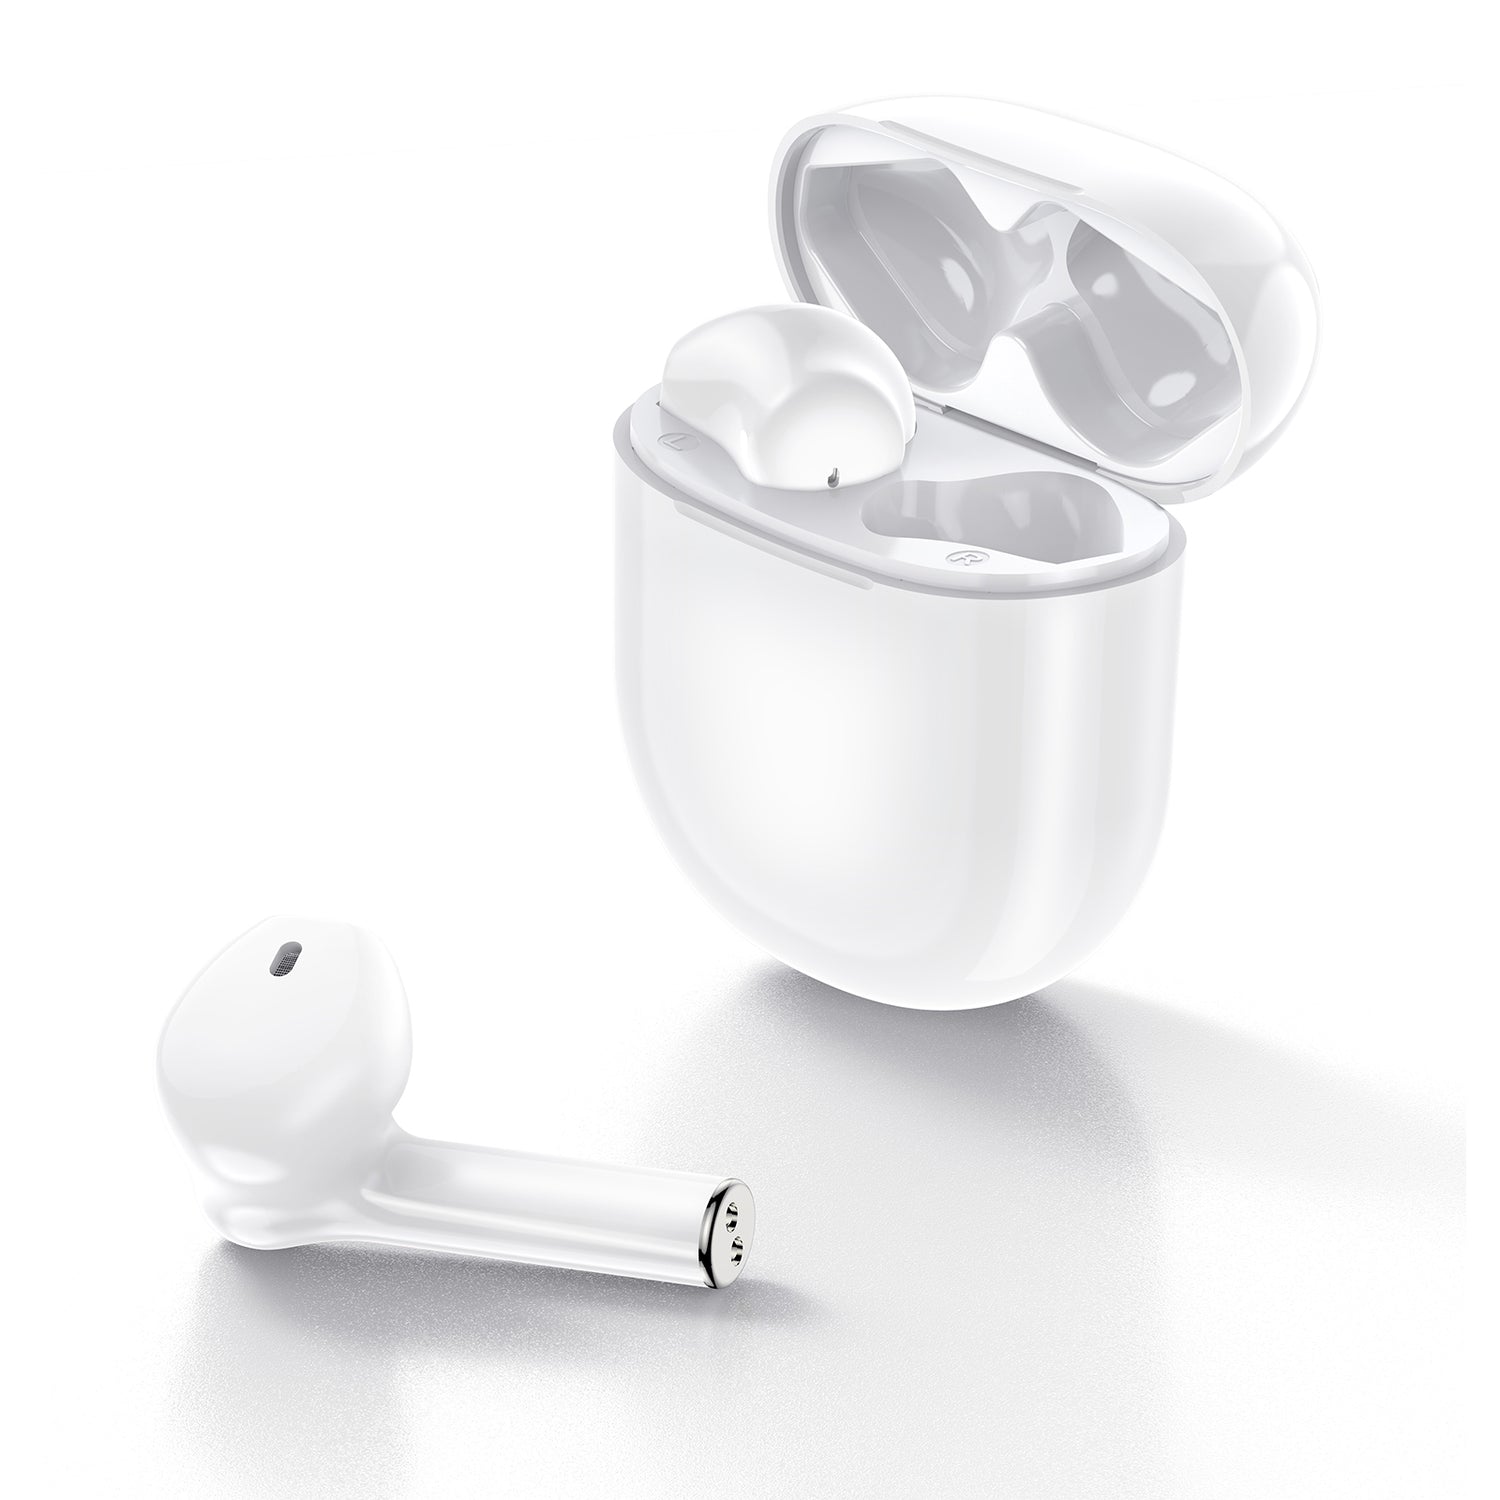 FitSmart Wireless Earbuds Earphones Bluetooth 5.0 For IOS Android In Built Mic - White-Headphones-PEROZ Accessories